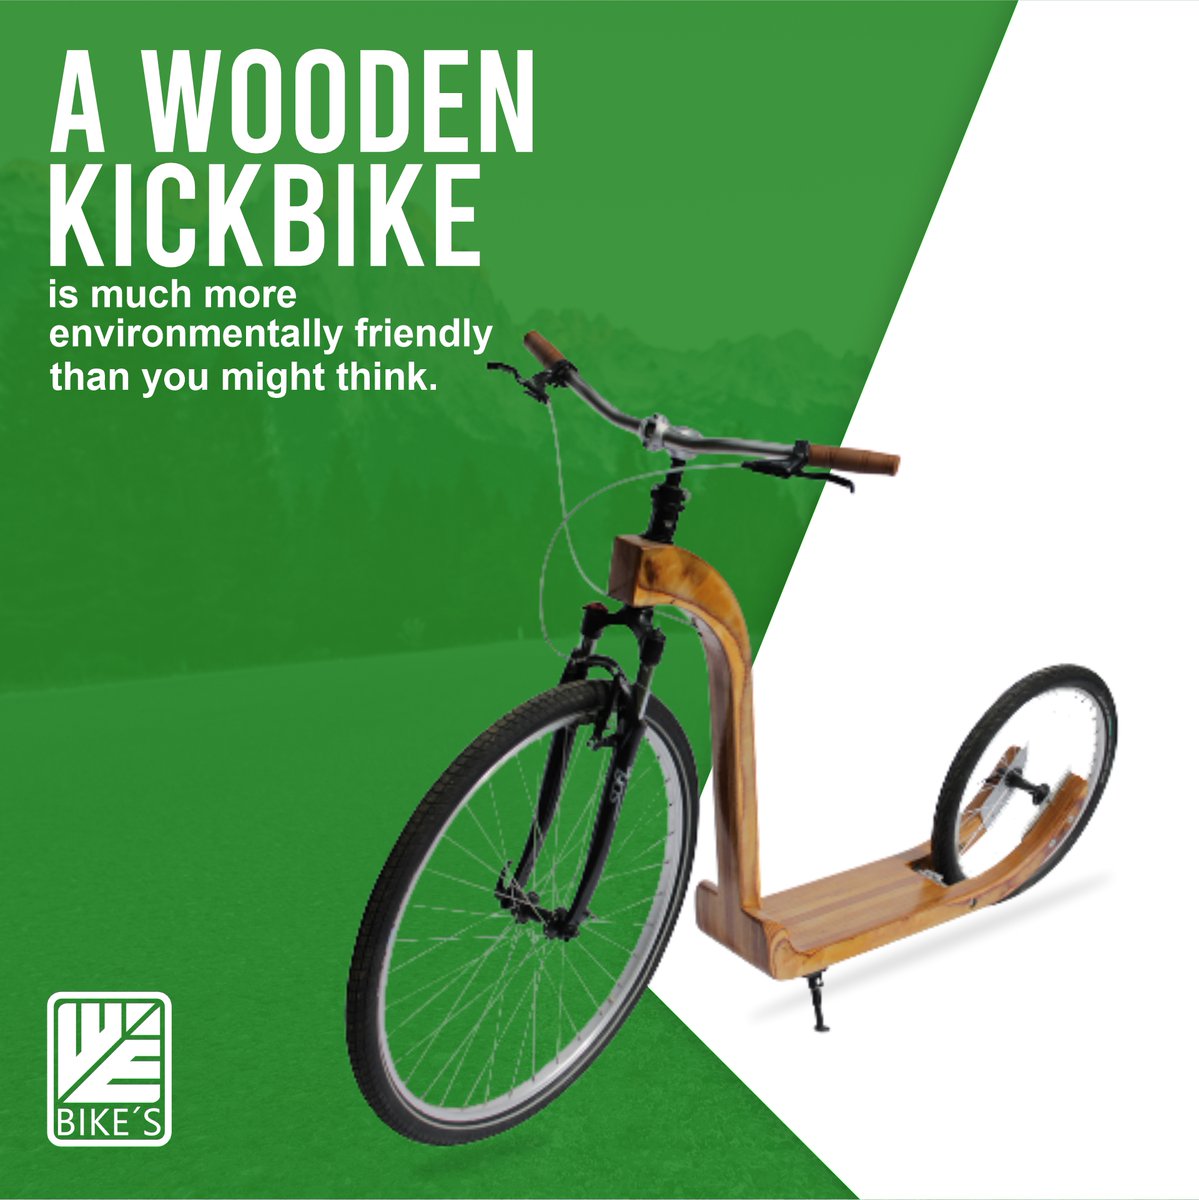 Until yesterday, the wooden scooter was just an outdated invention that was replaced by mass products! But a wooden scooter is much more environmentally friendly than you might think.
----
🌐 wooden-kickbike.de
.
#woodenkickbikes #wooden #unique #handmade #webikes